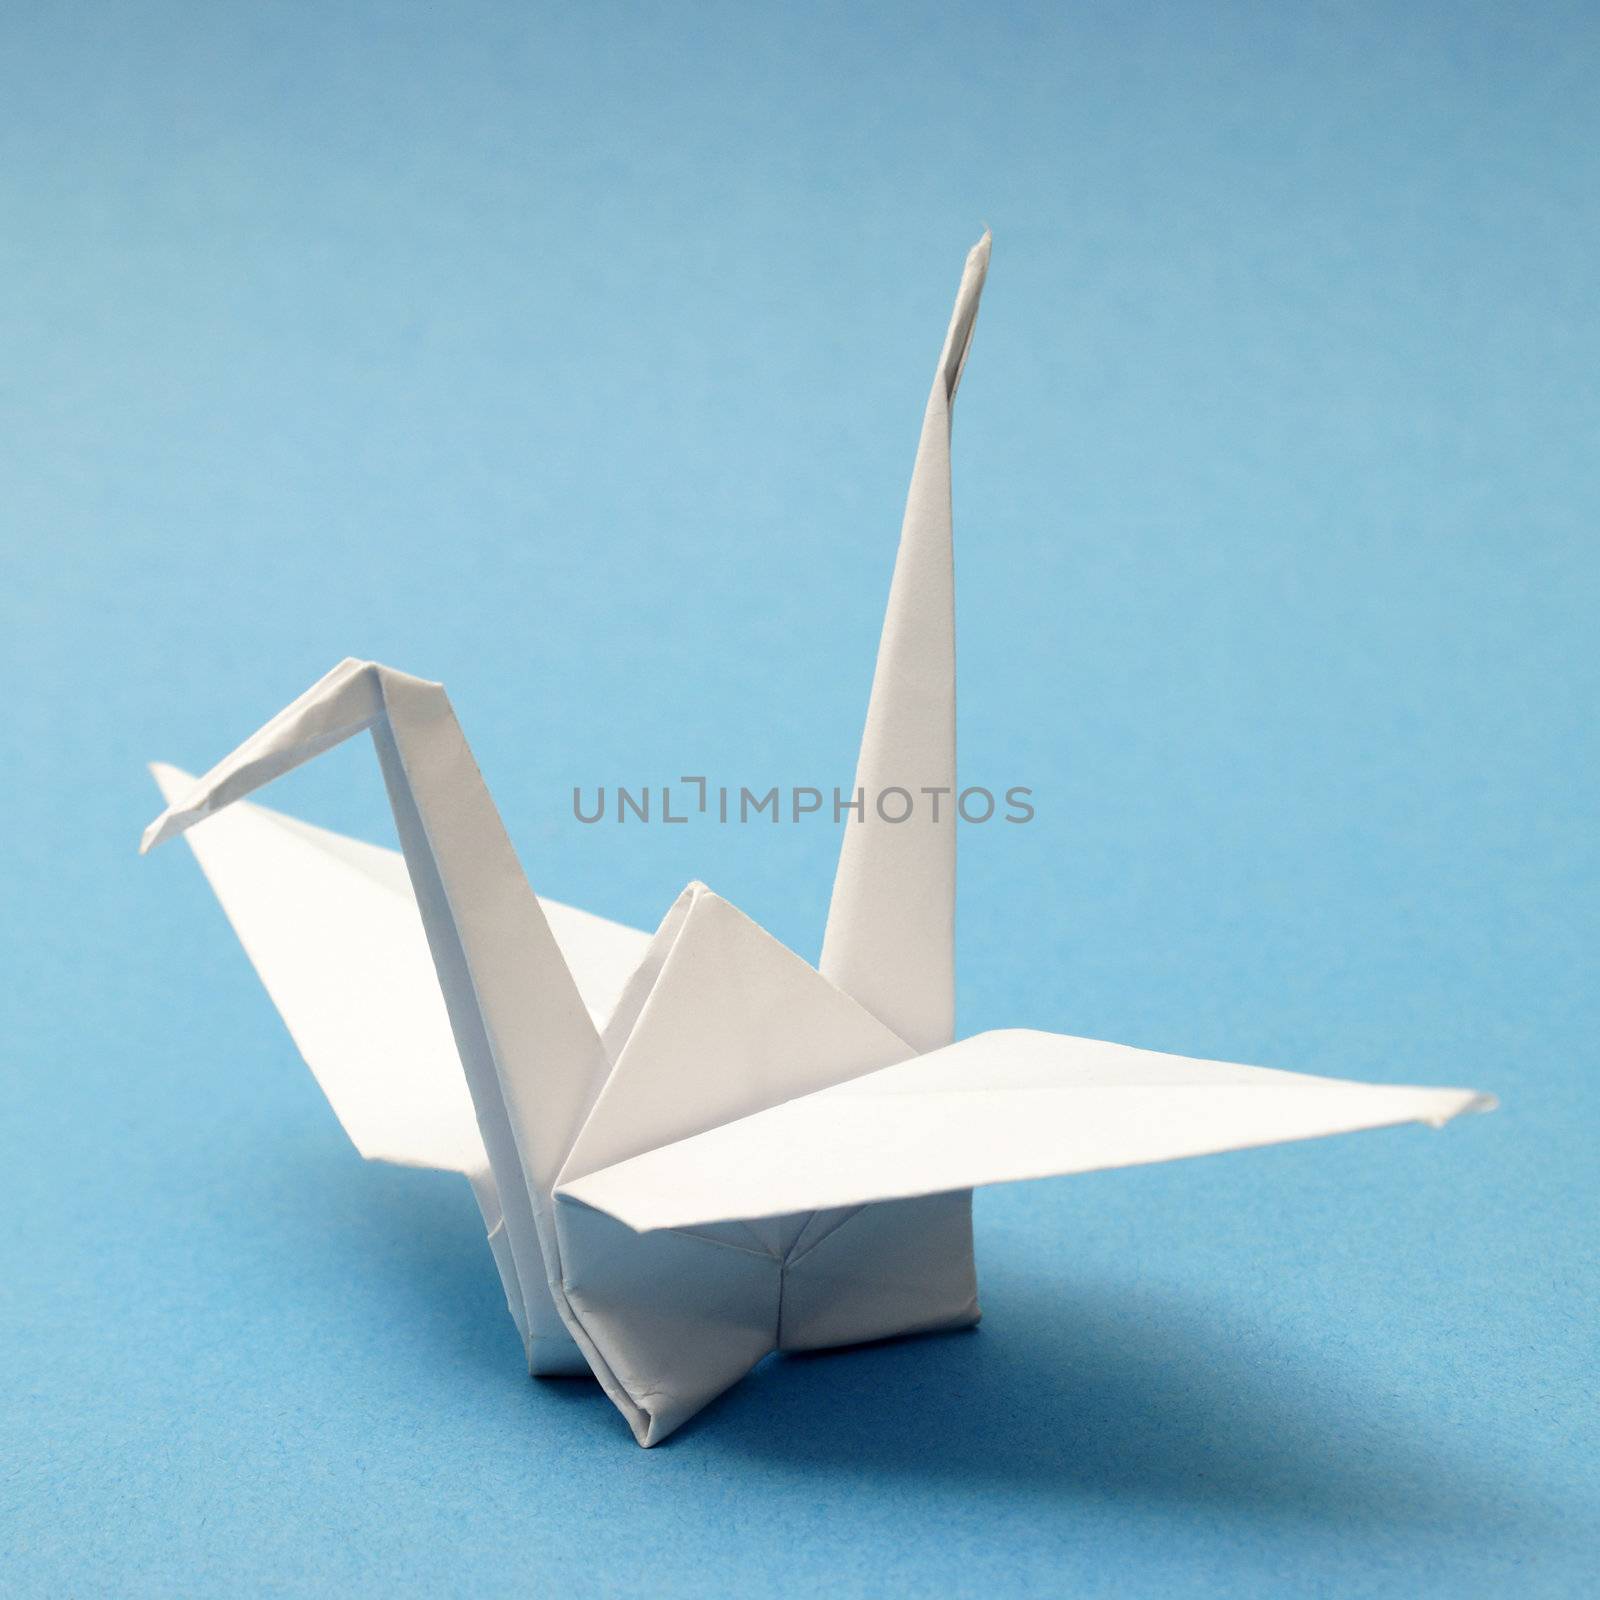 A nicely folded origami swan over a blue tranquil background.